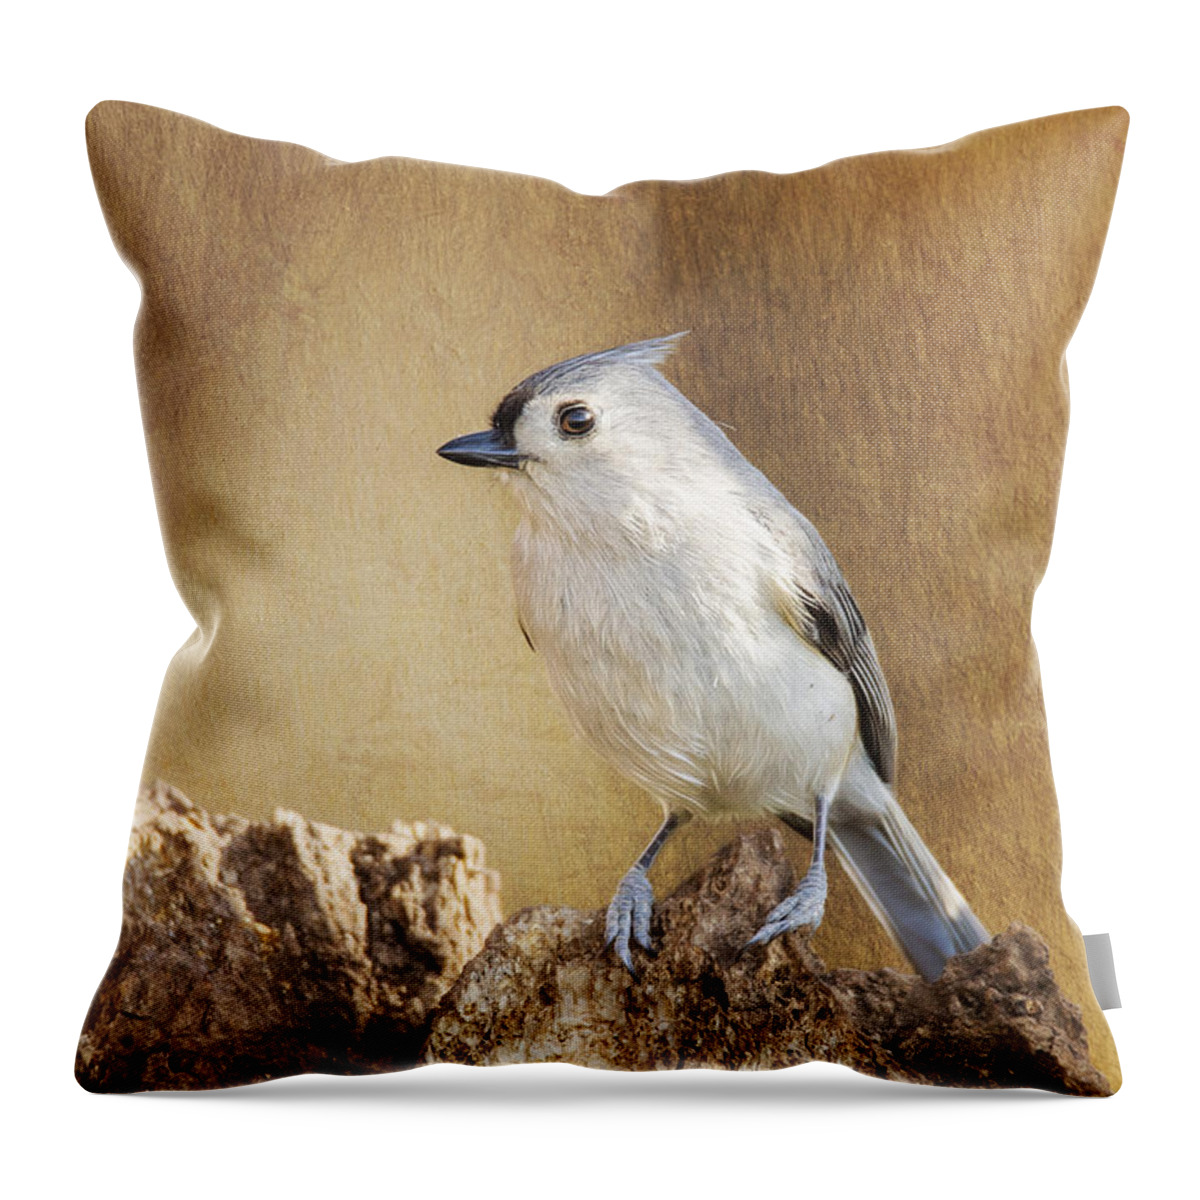 Baeolophus Throw Pillow featuring the photograph Tufted On Tree Bark by Bill and Linda Tiepelman